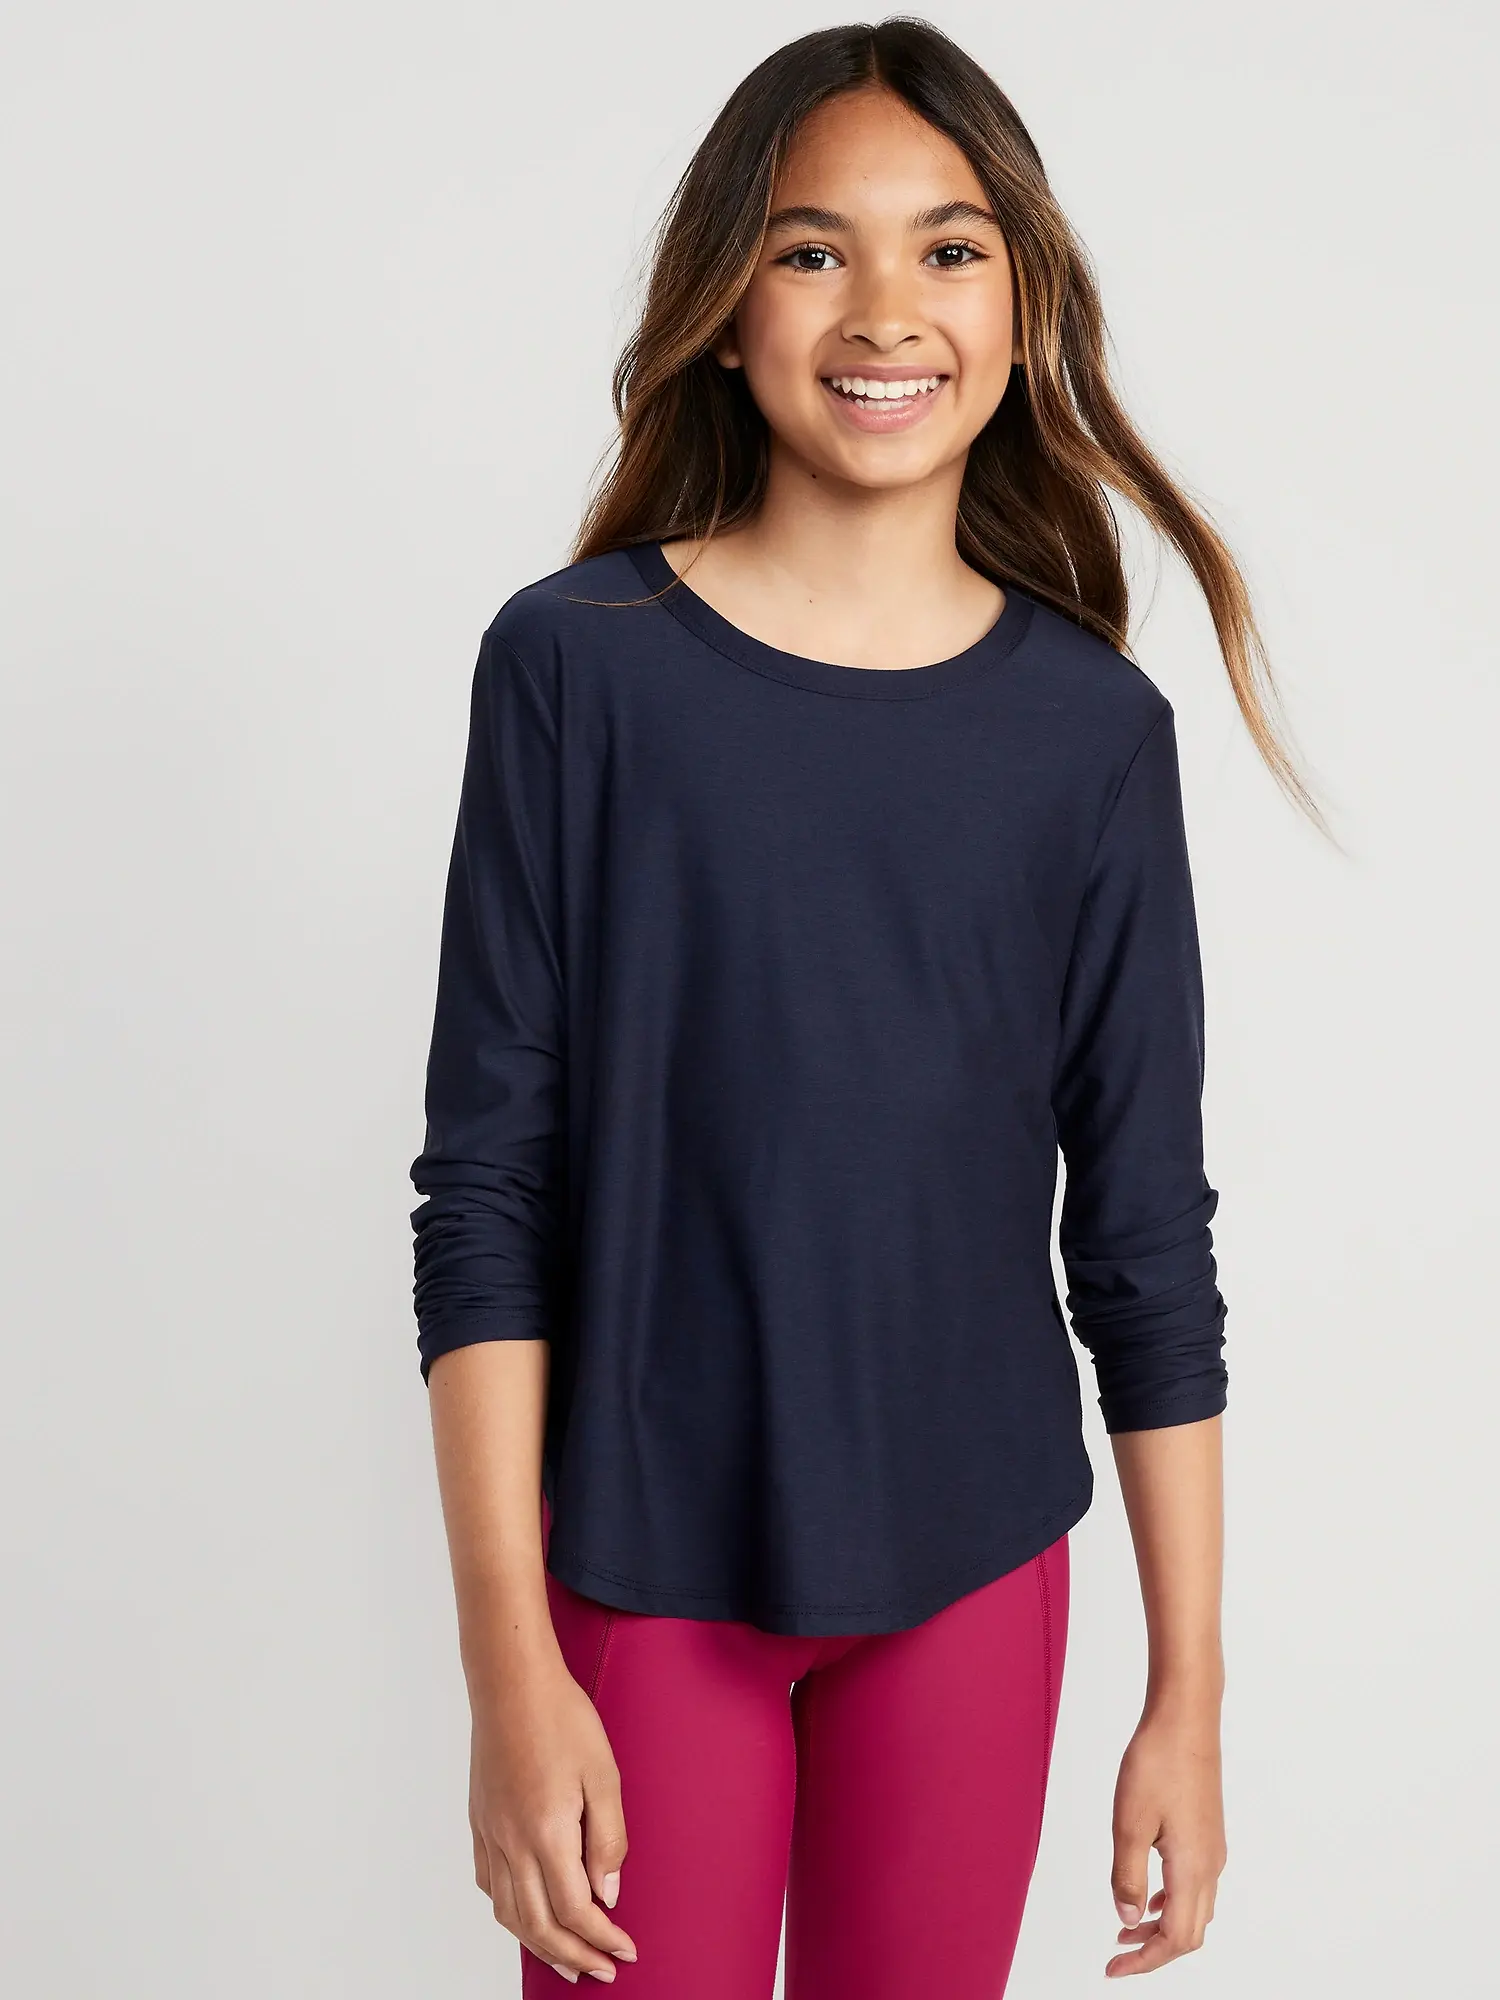 Old Navy Cloud 94 Soft Go-Dry Long-Sleeve T-Shirt for Girls blue. 1